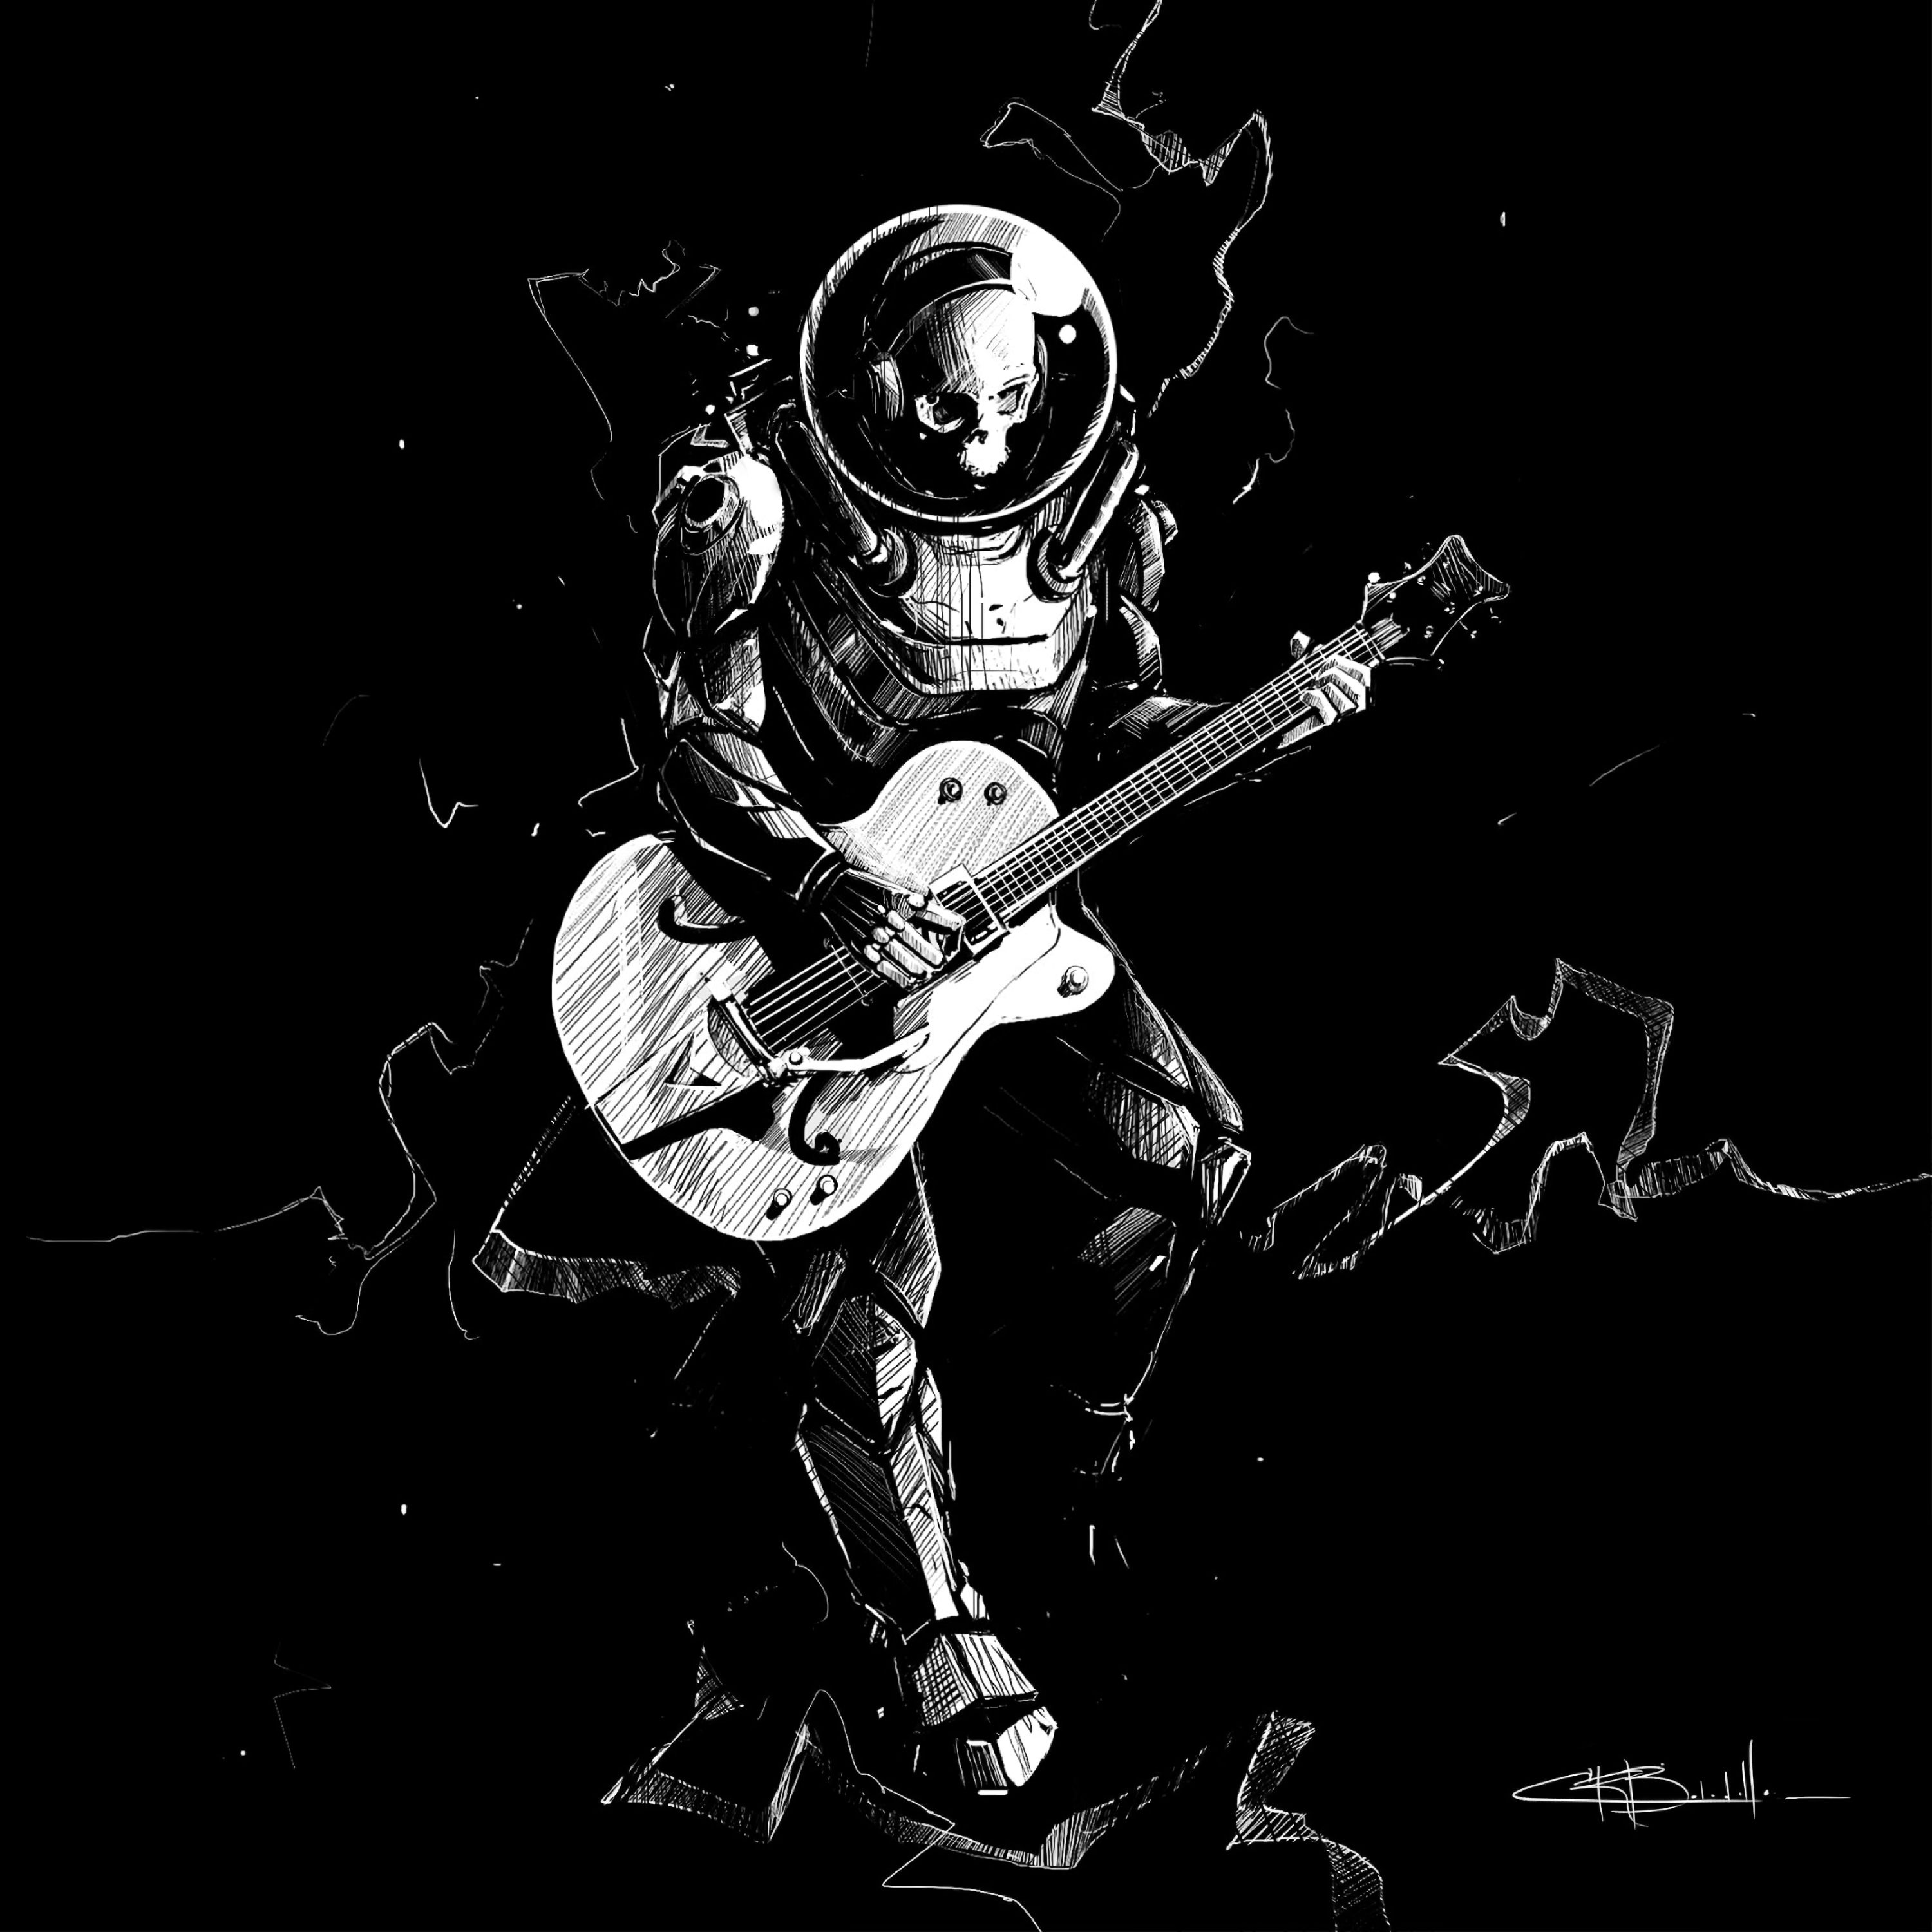 58587 Screensavers and Wallpapers Space Suit for phone. Download art, guitar, bw, chb, guitar player, guitarist, spacesuit, space suit, skeleton pictures for free